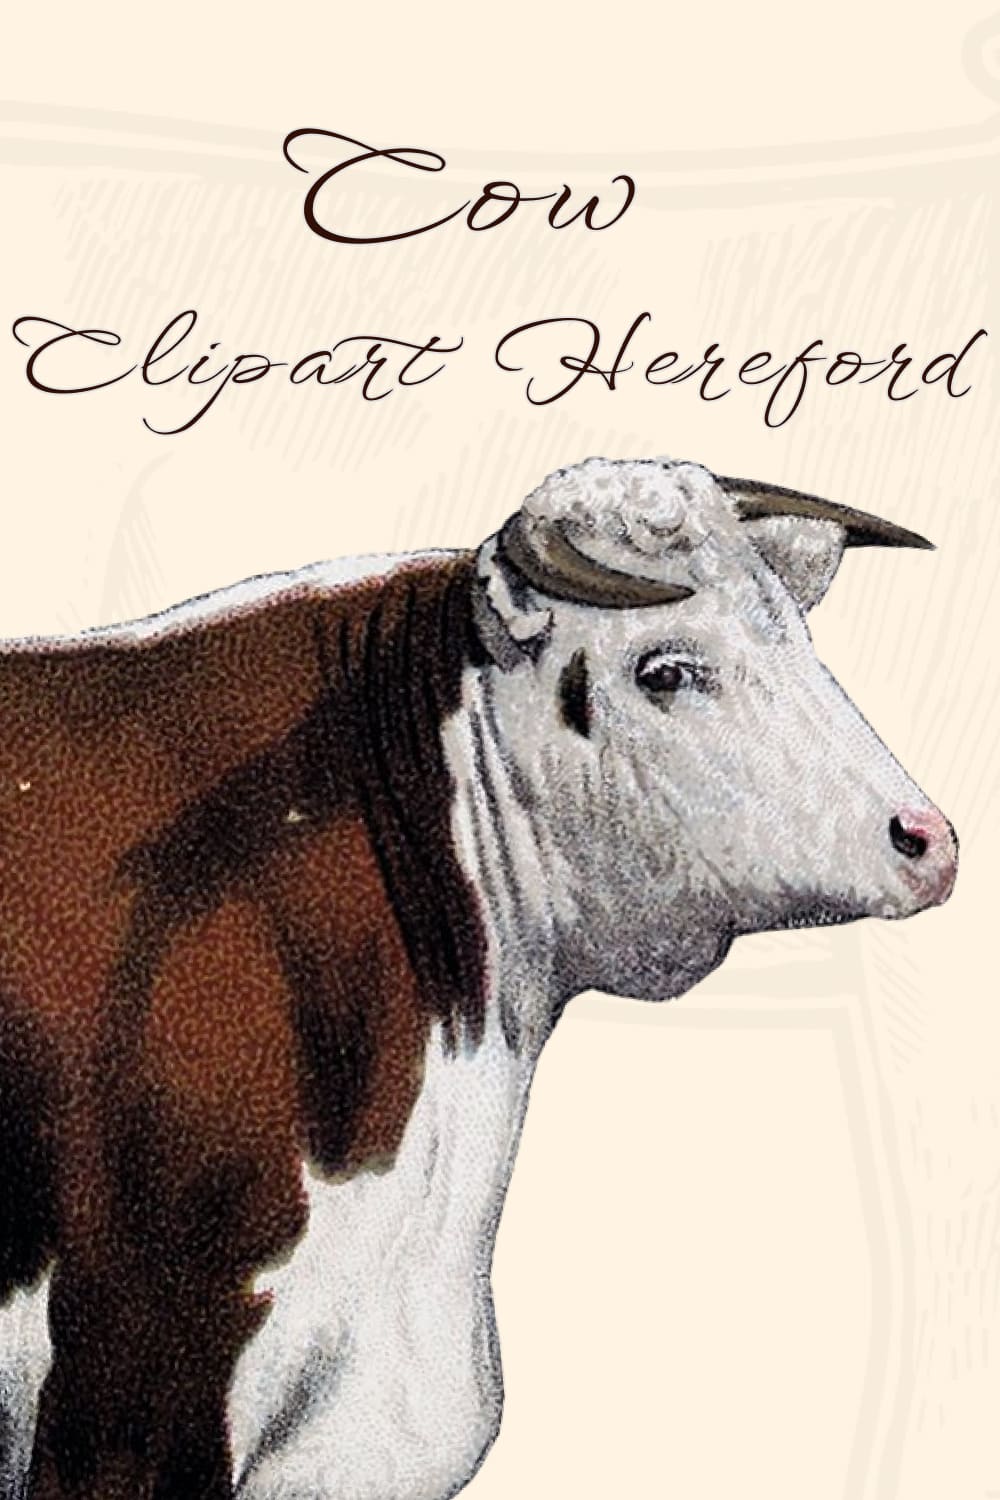 Cow Clipart Hereford - Pinterest Image Preview.